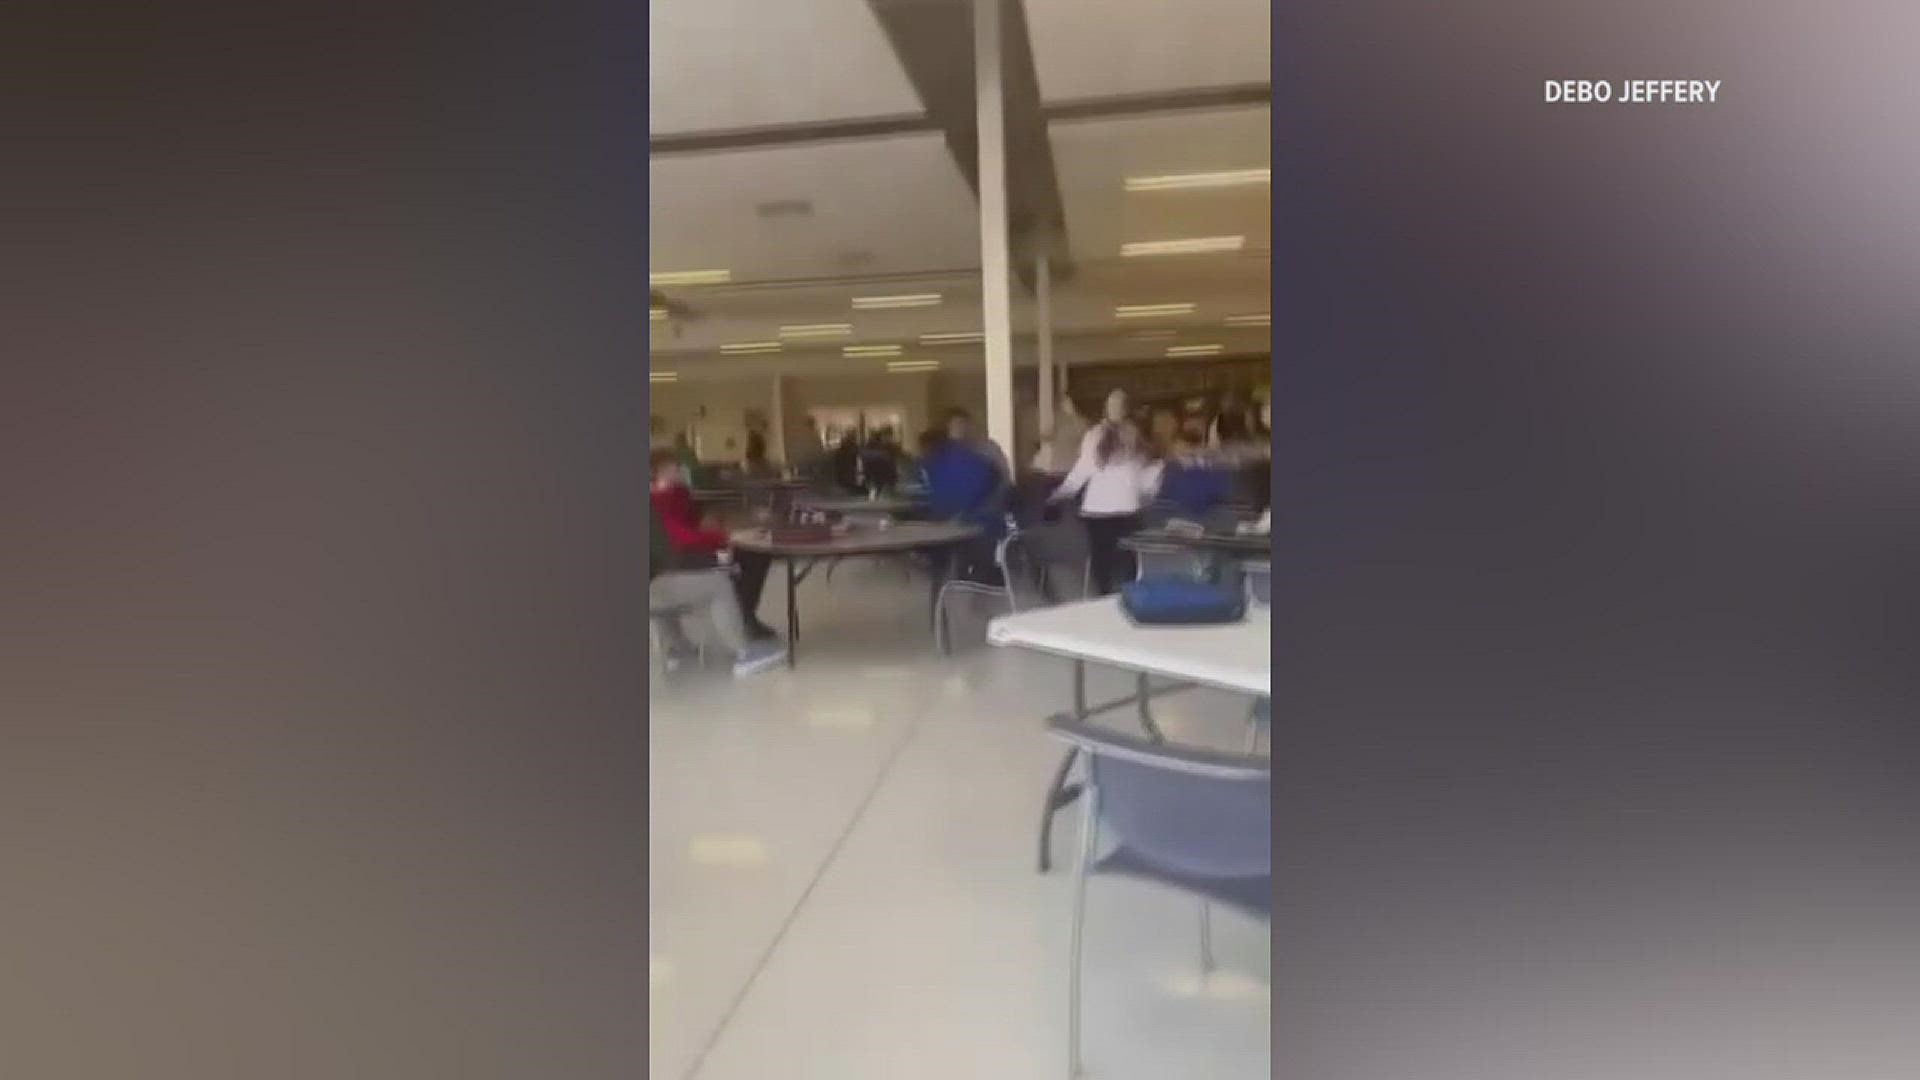 Shortly after the incident on Wednesday, videos began circulating on social media. The district says it is not reflective of their student body or staff.